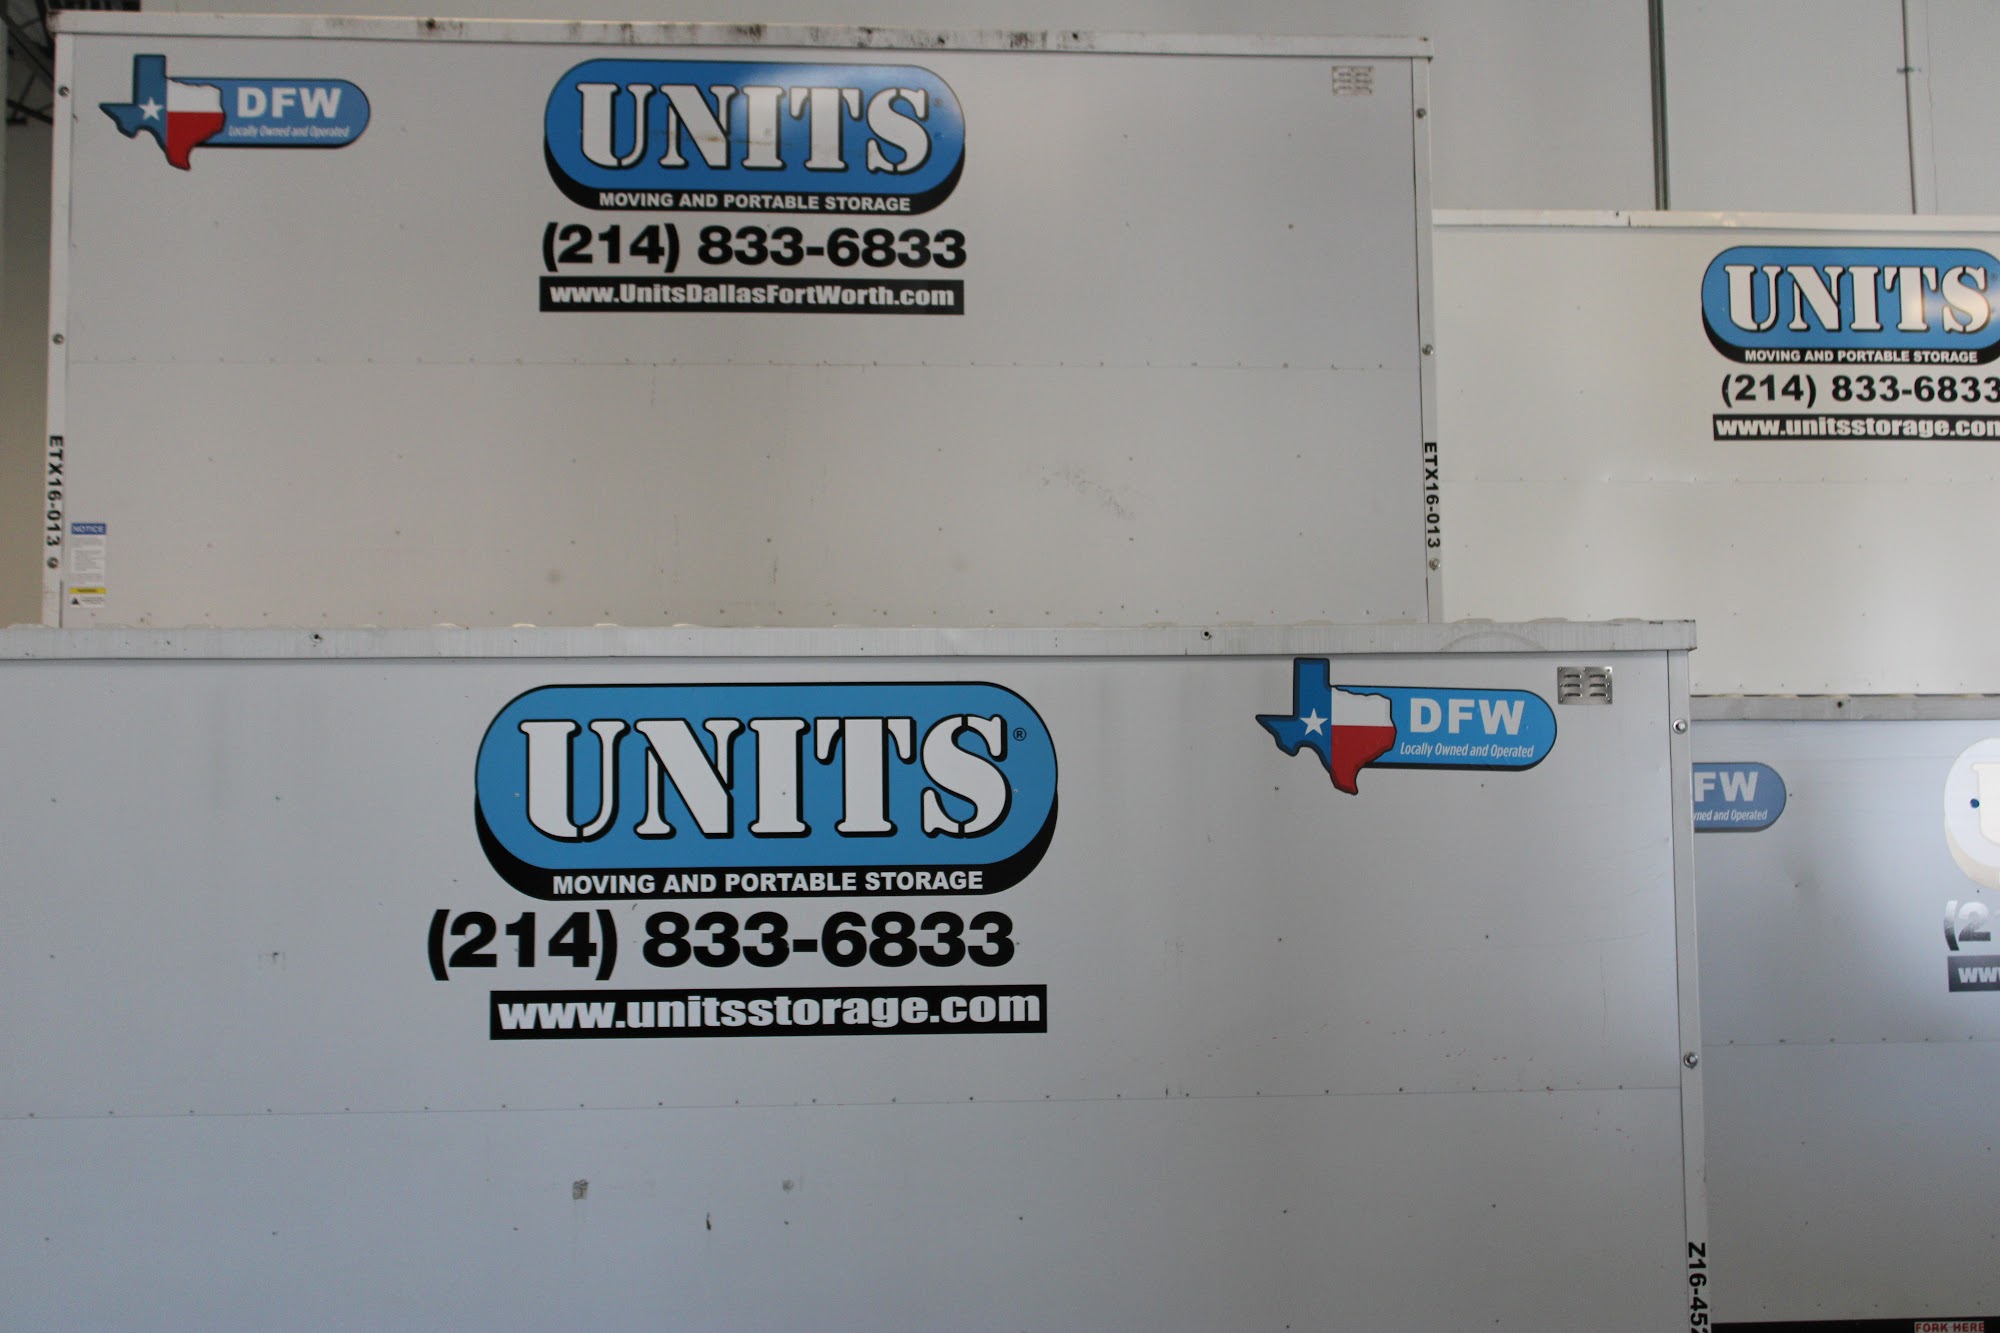 UNITS Moving & Portable Storage of Dallas-Fort Worth